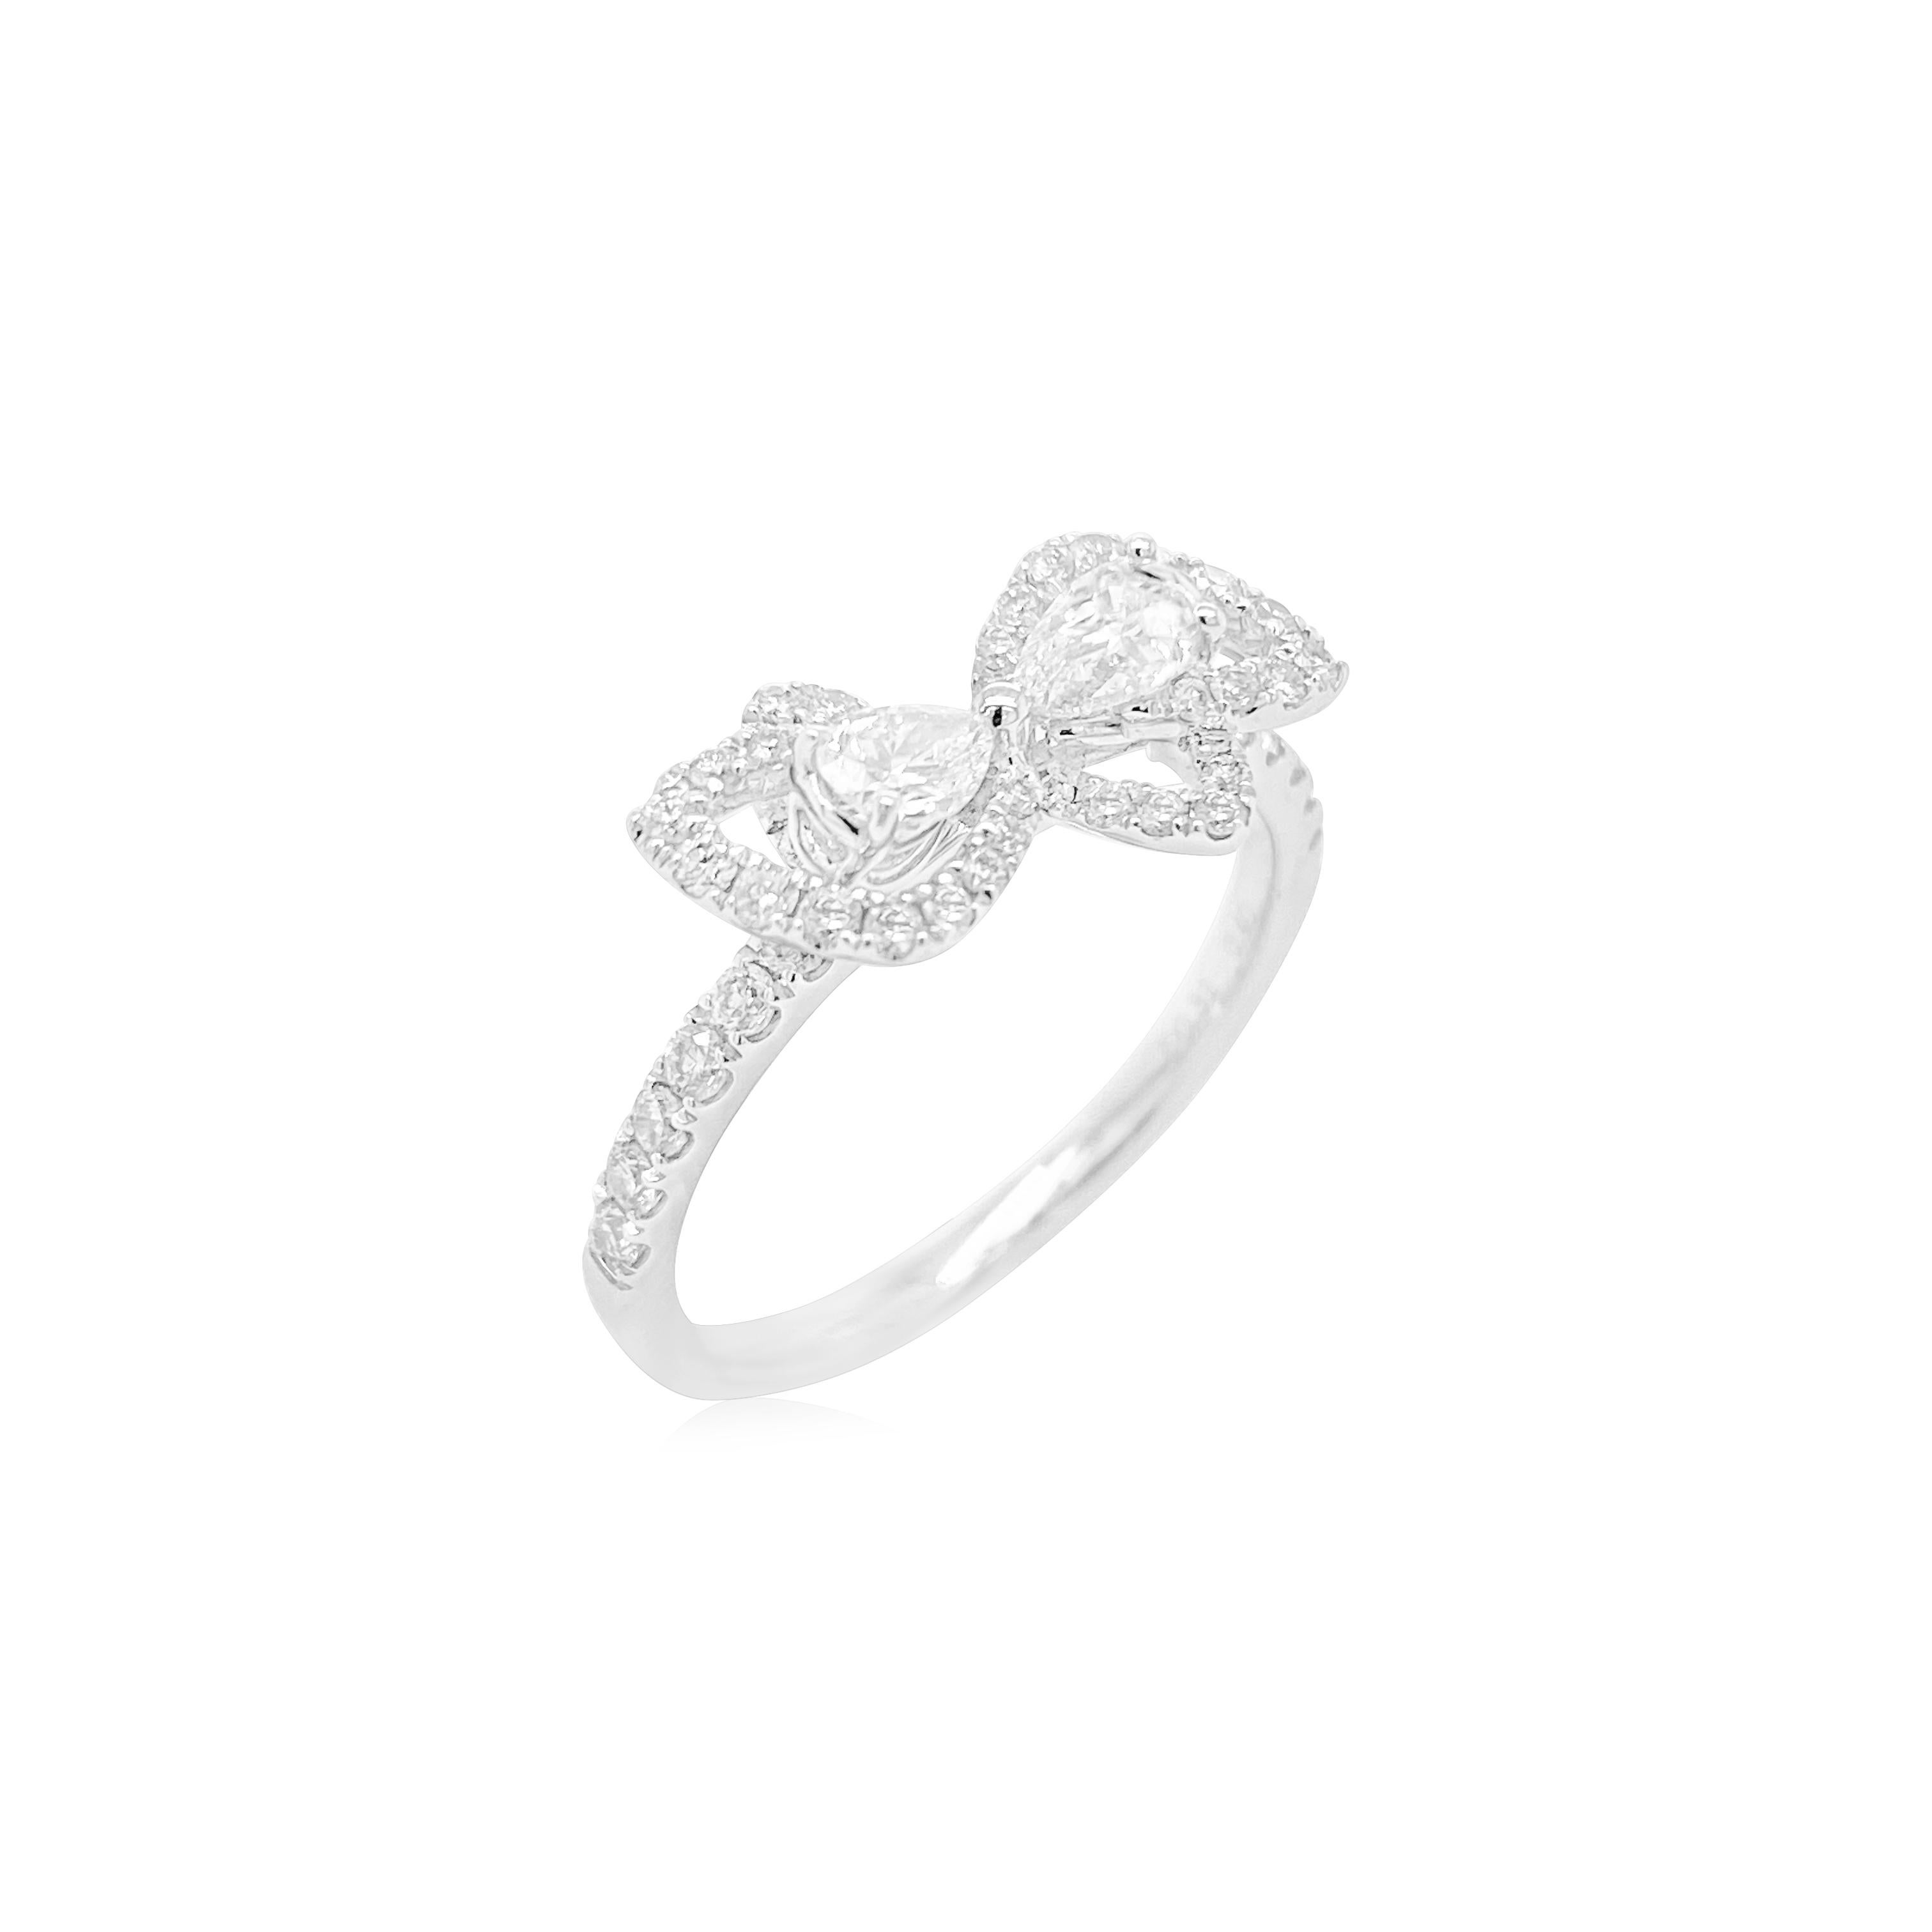 This beautiful ring in the shape of a bow is styled with Natural White Pear Shape diamonds, a unique design for a special occasion.

Center White Diamonds - 0.31 CT
White Diamonds - 0.40 CT
Made in Platinum

HYT Jewelry is a privately owned company